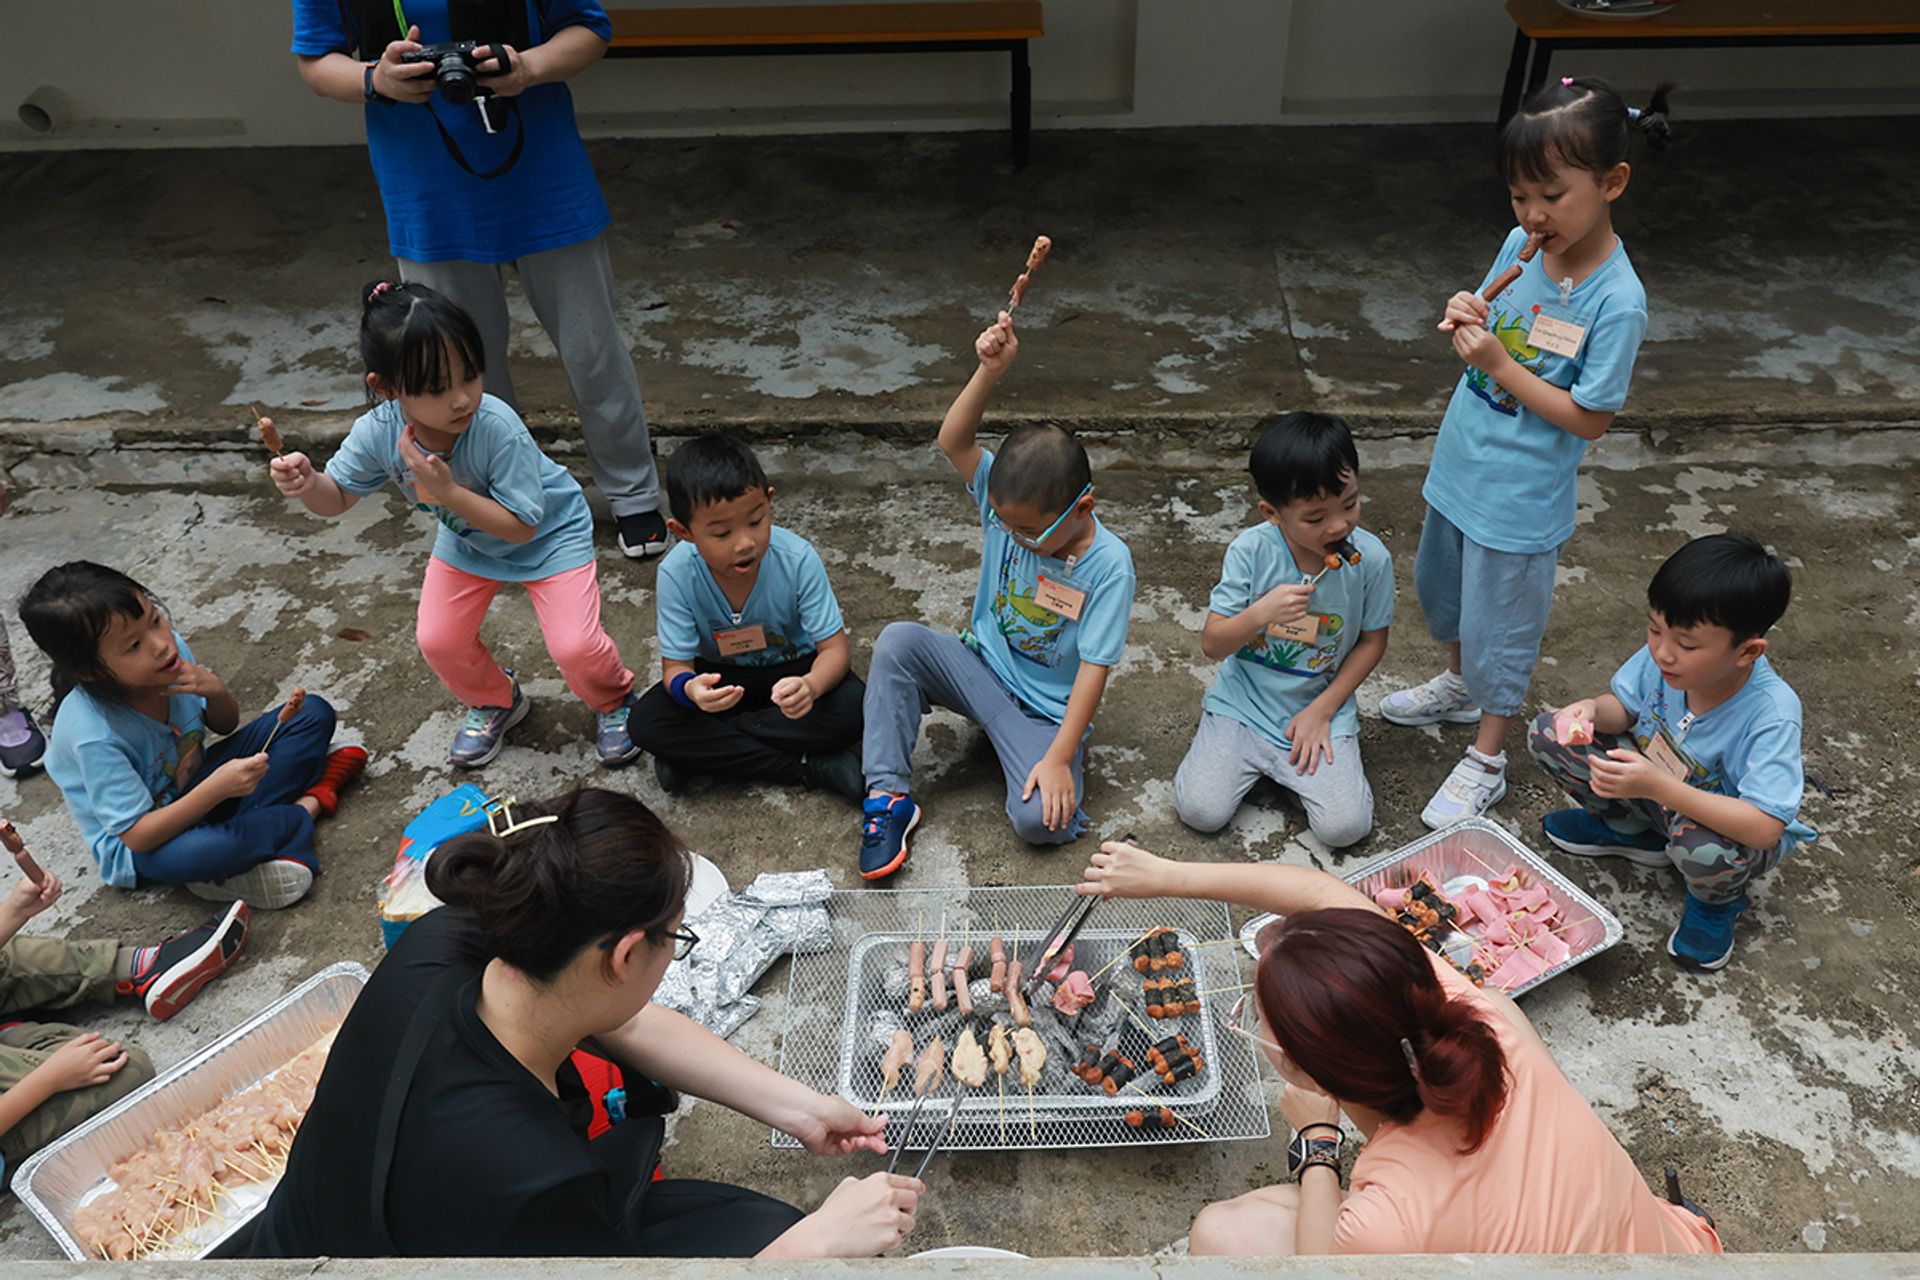 The adults help to grill the food skewers prepared by the children.